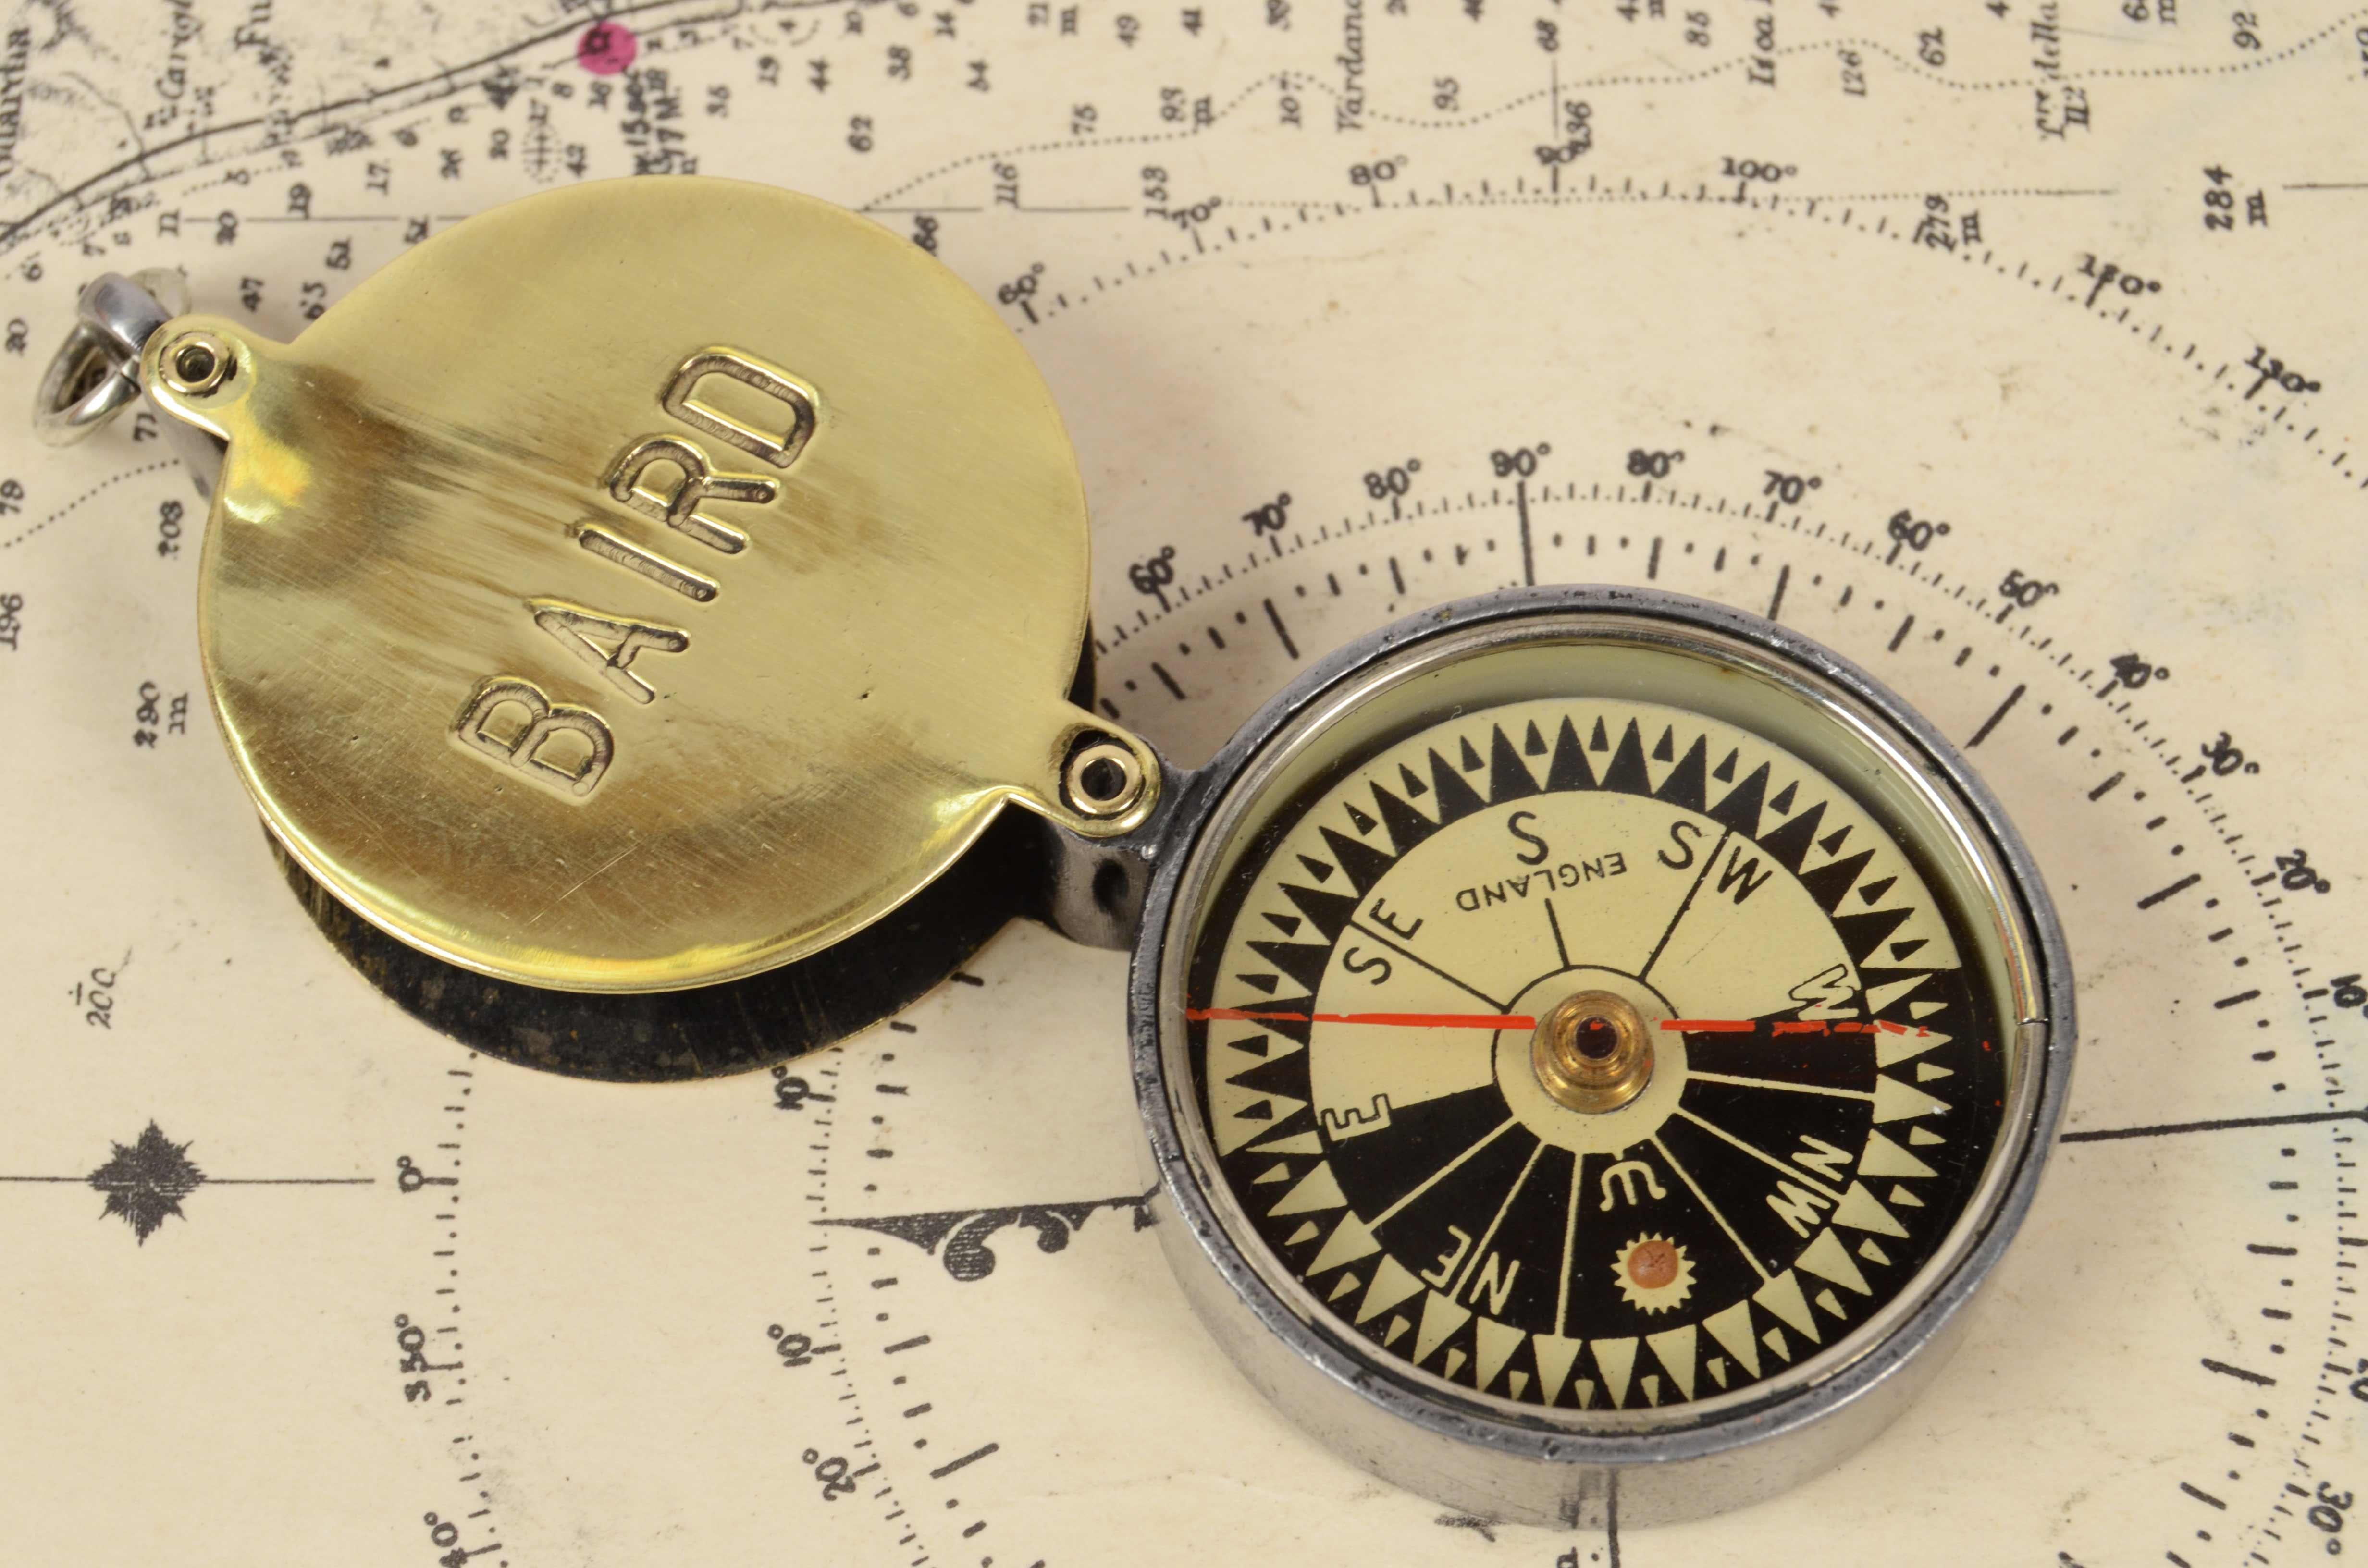 Baird signed brass and zamak pocket nautical compass with resealable case. WWI British manufacture. 
Very good condition, fully functional. 
Measures: diameter 3.8 cm, inch 1.6 thickness 1.4 cm, inch 0.45.
Shipping is insured by Lloyd's London;